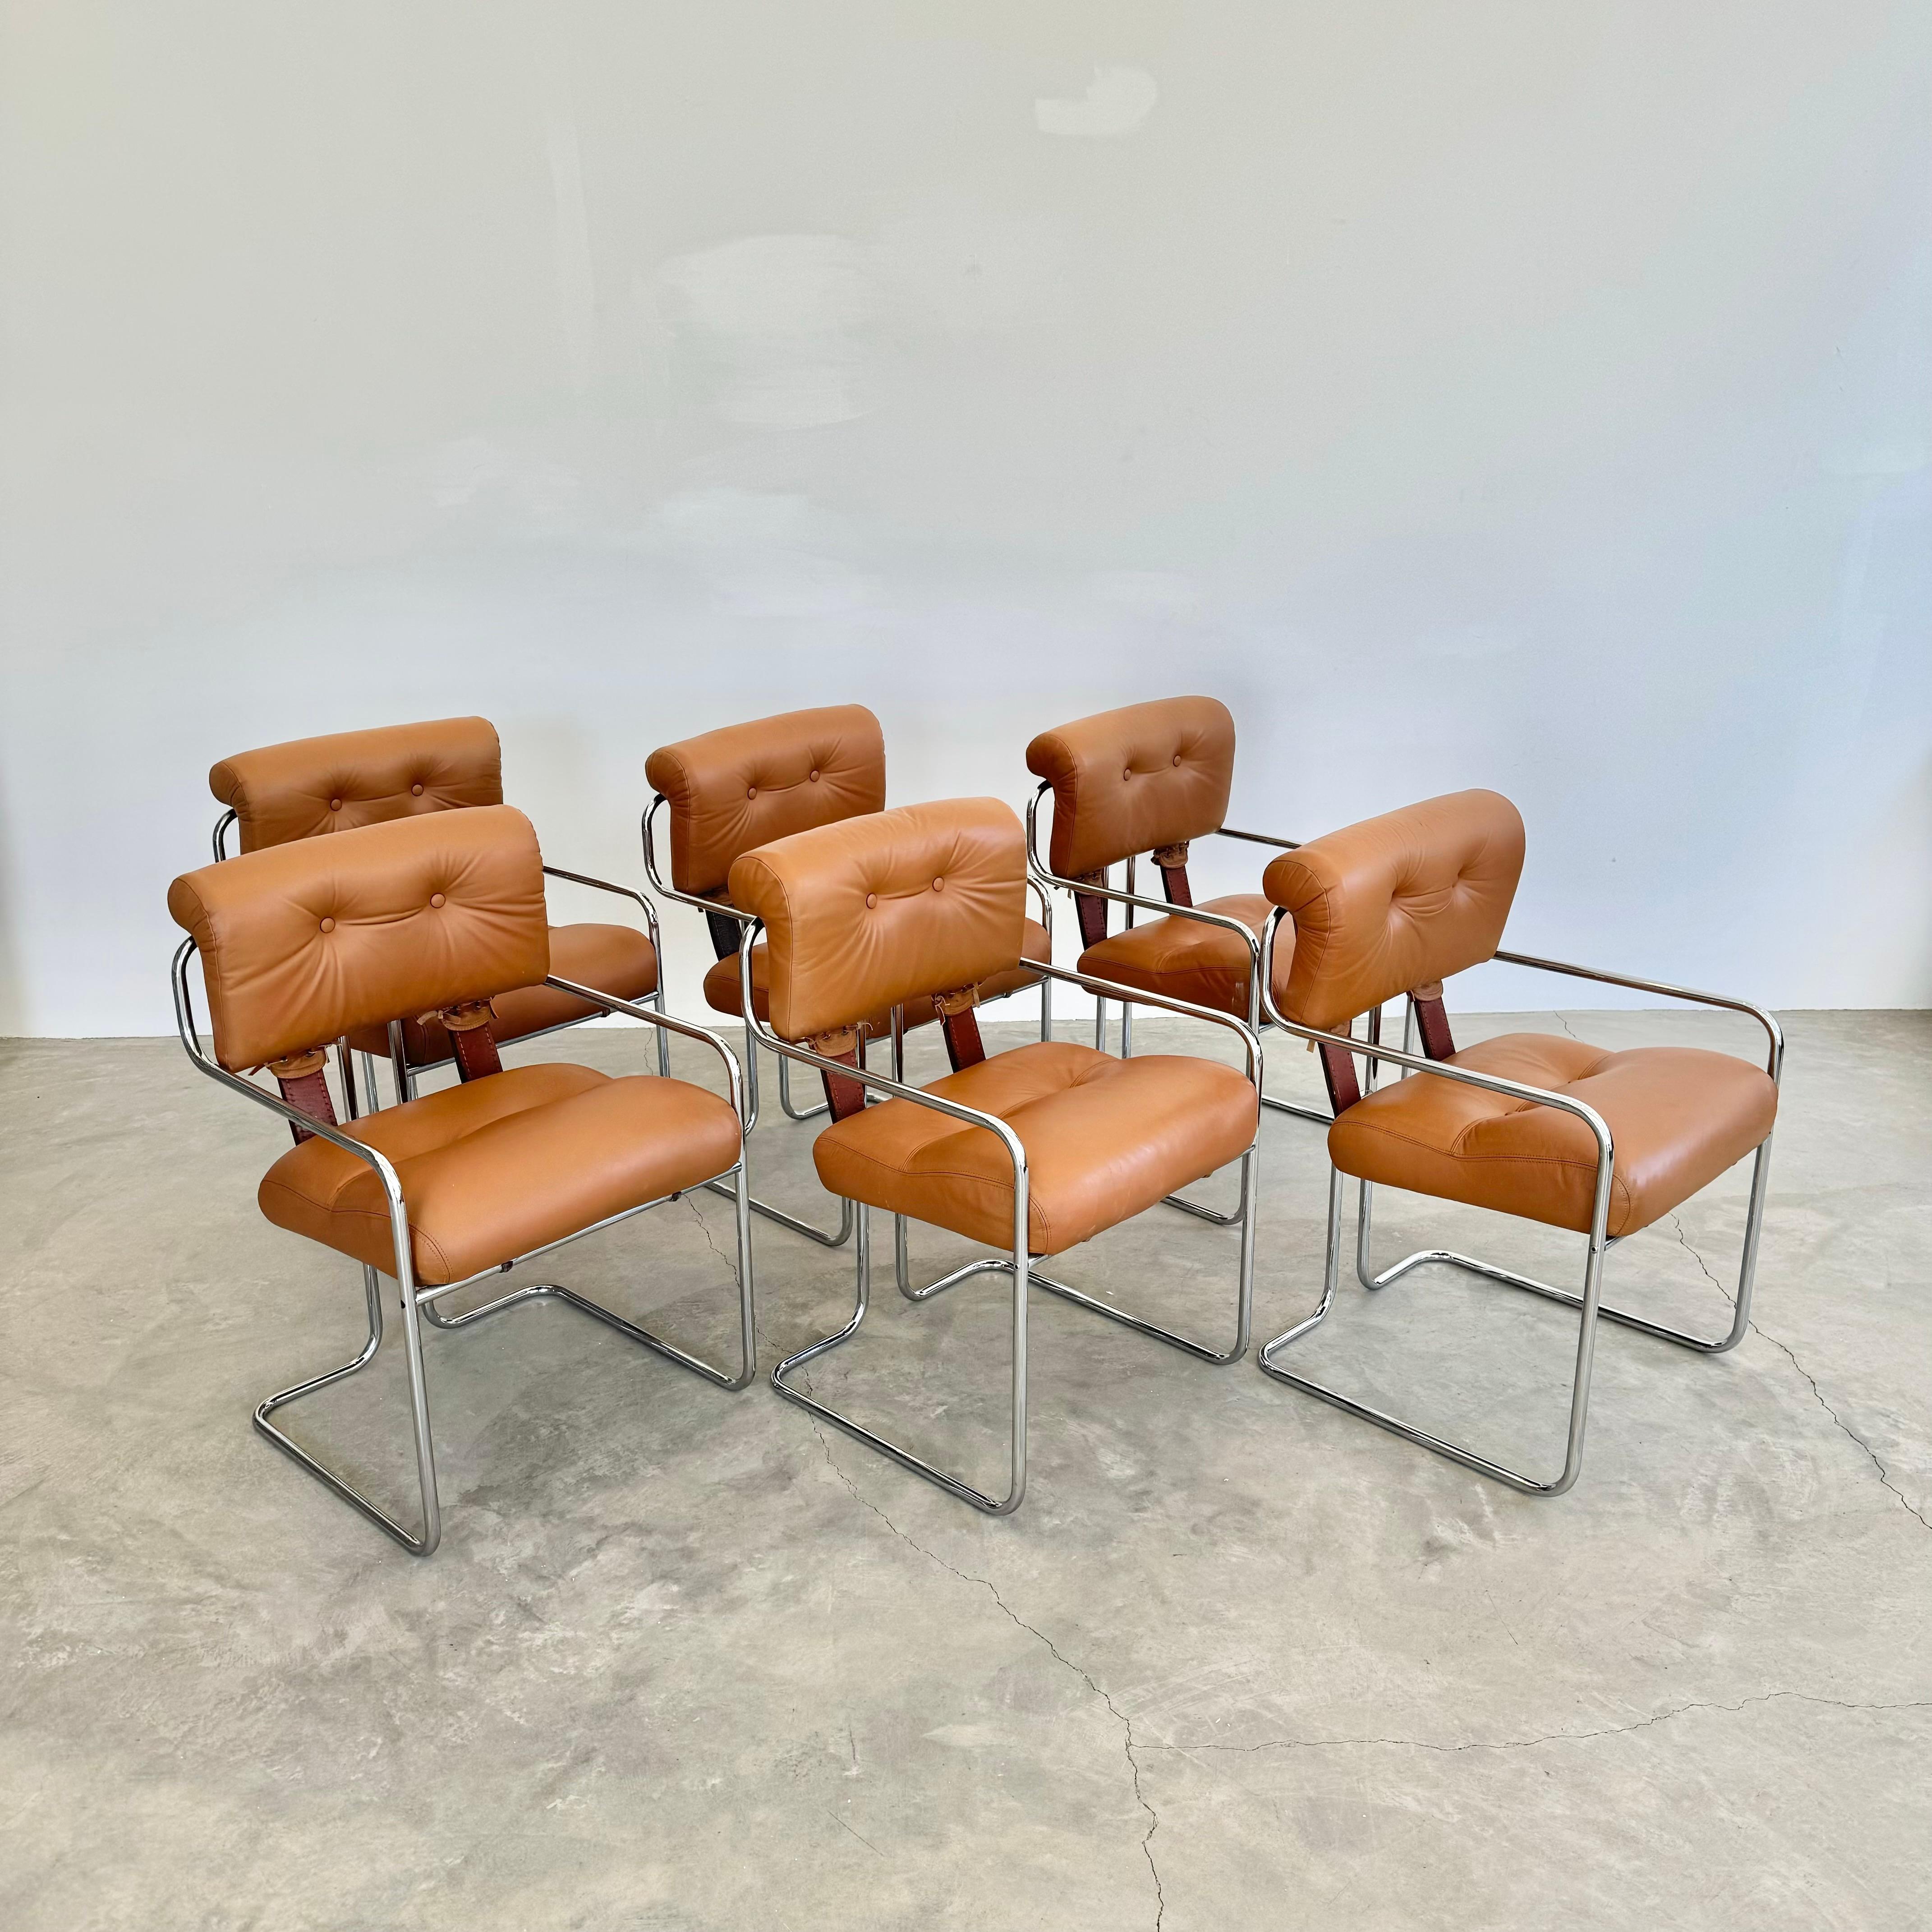 Italian Set of 6 'Tucroma' Chairs in Tan by Guido Faleschini, 1970s Italy For Sale